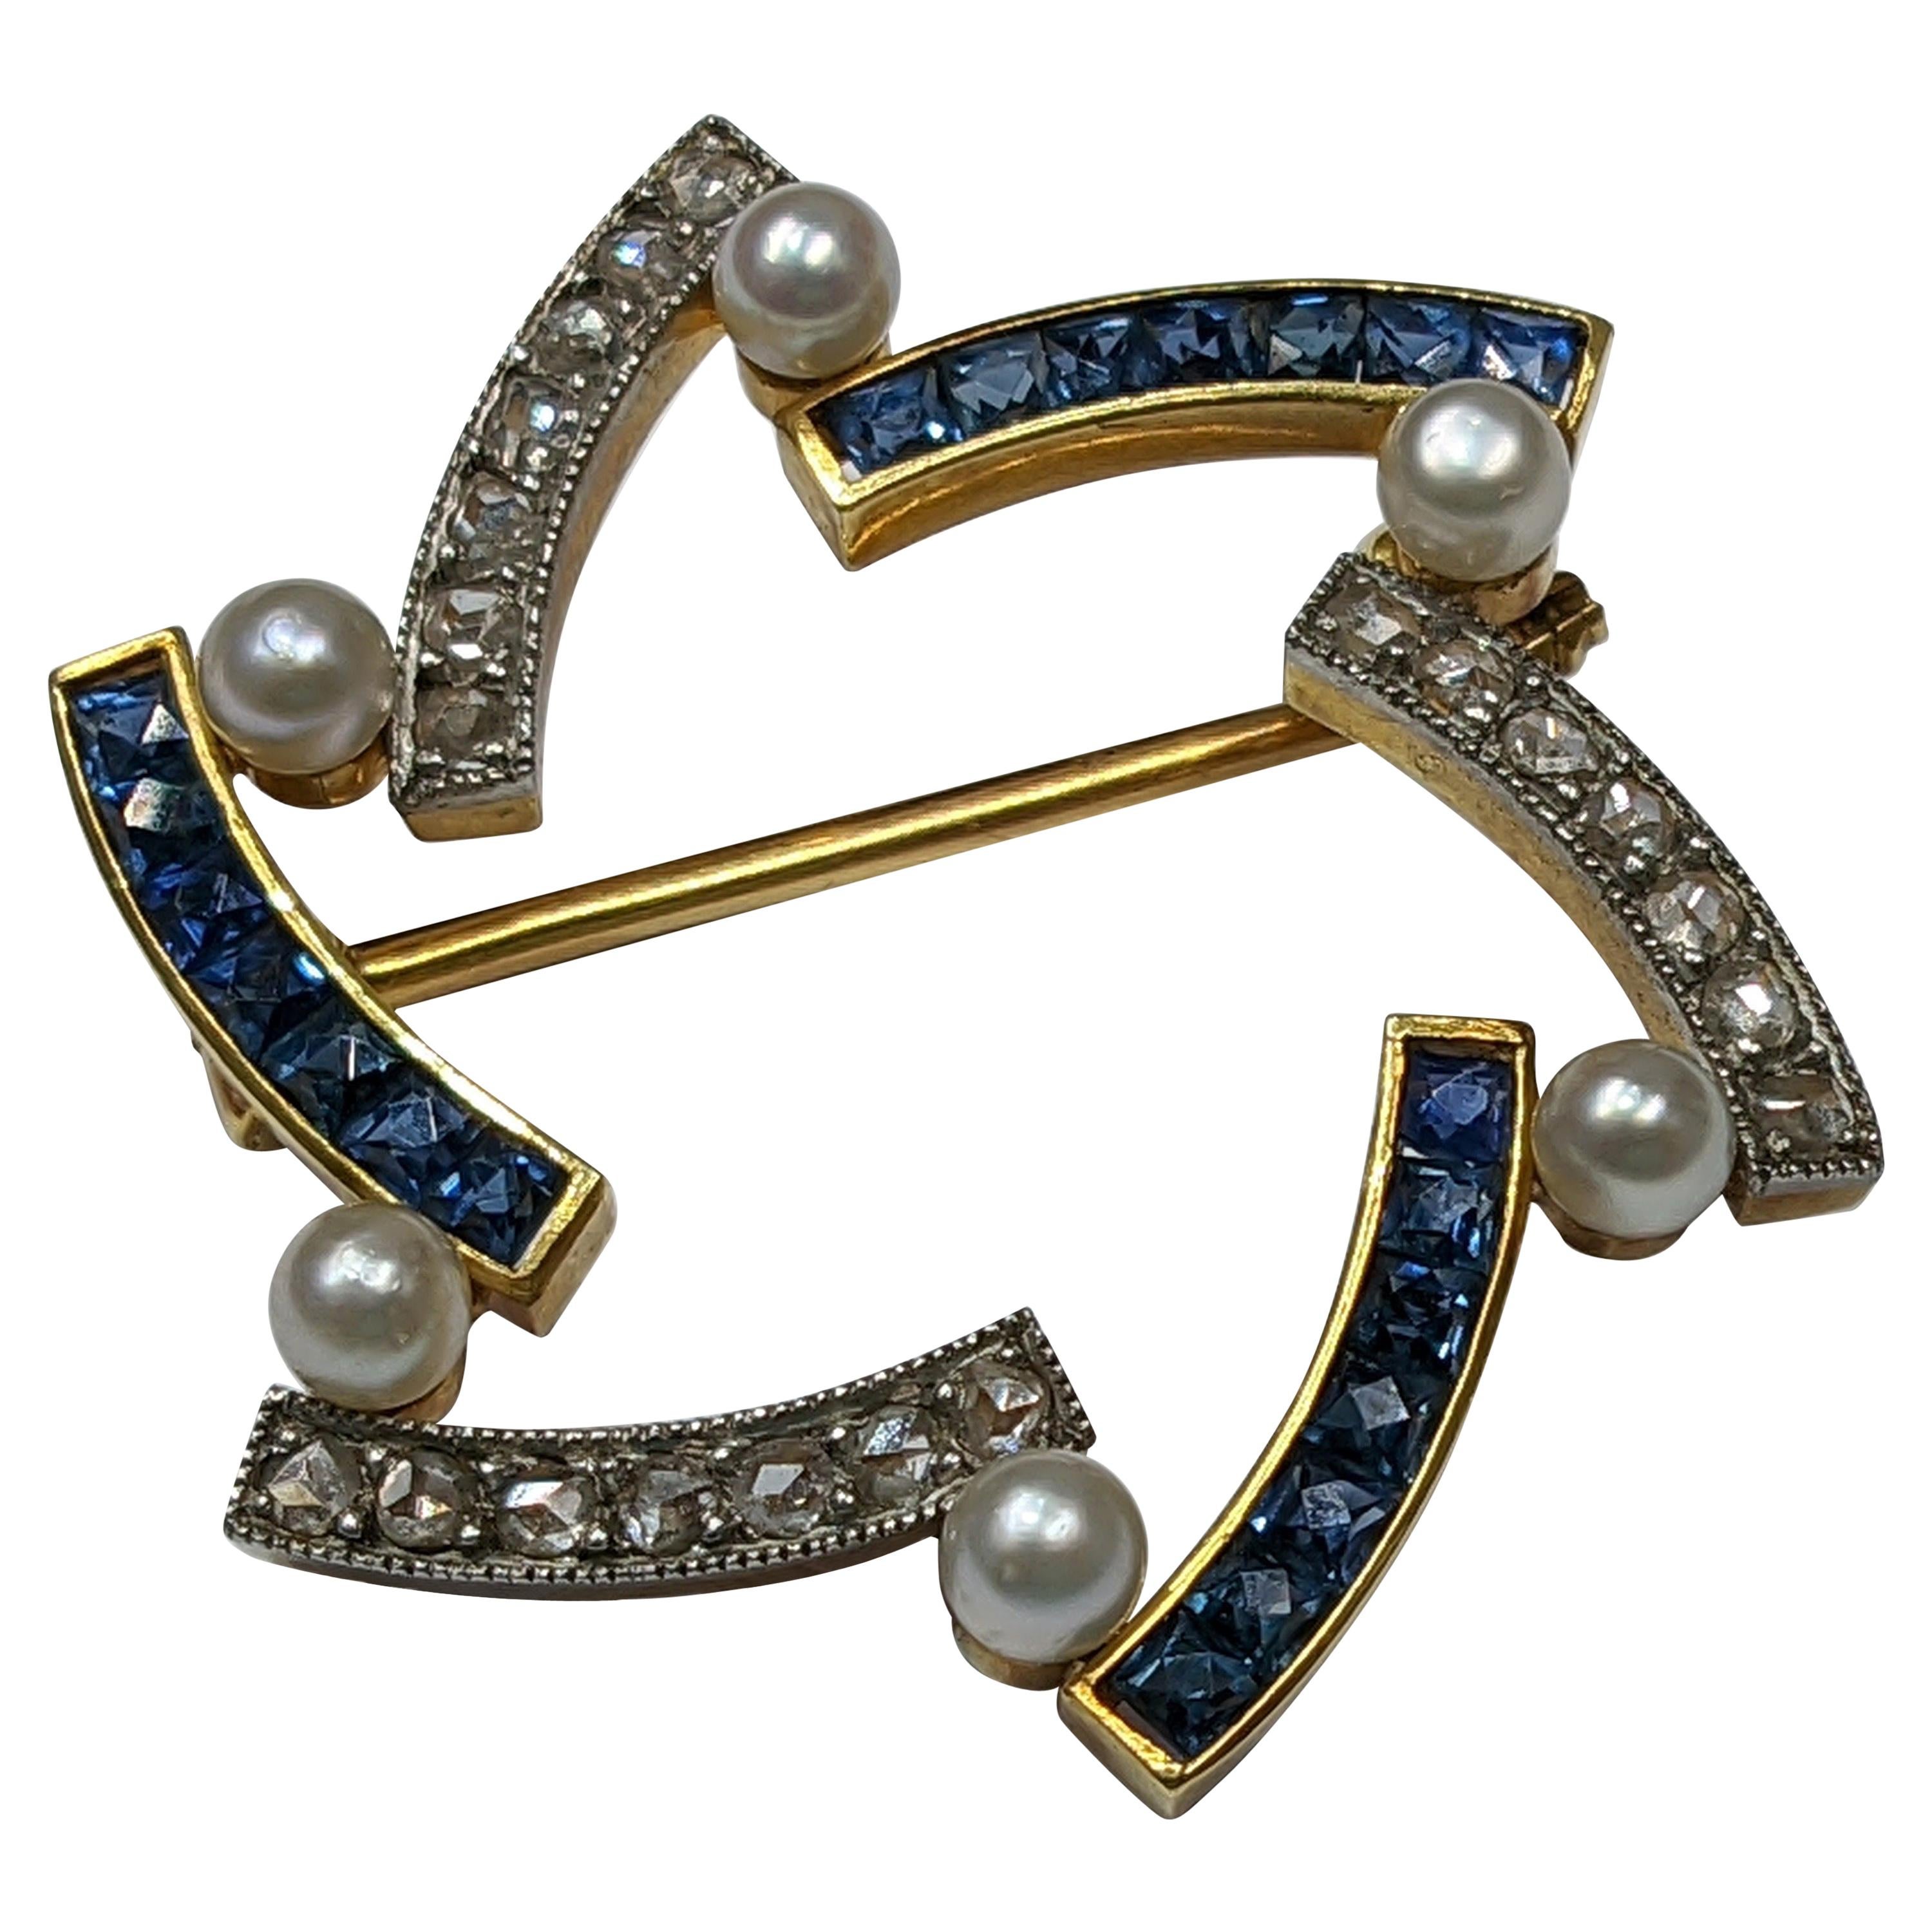 1910s Star Pin with Sapphire Diamonds and Pearls